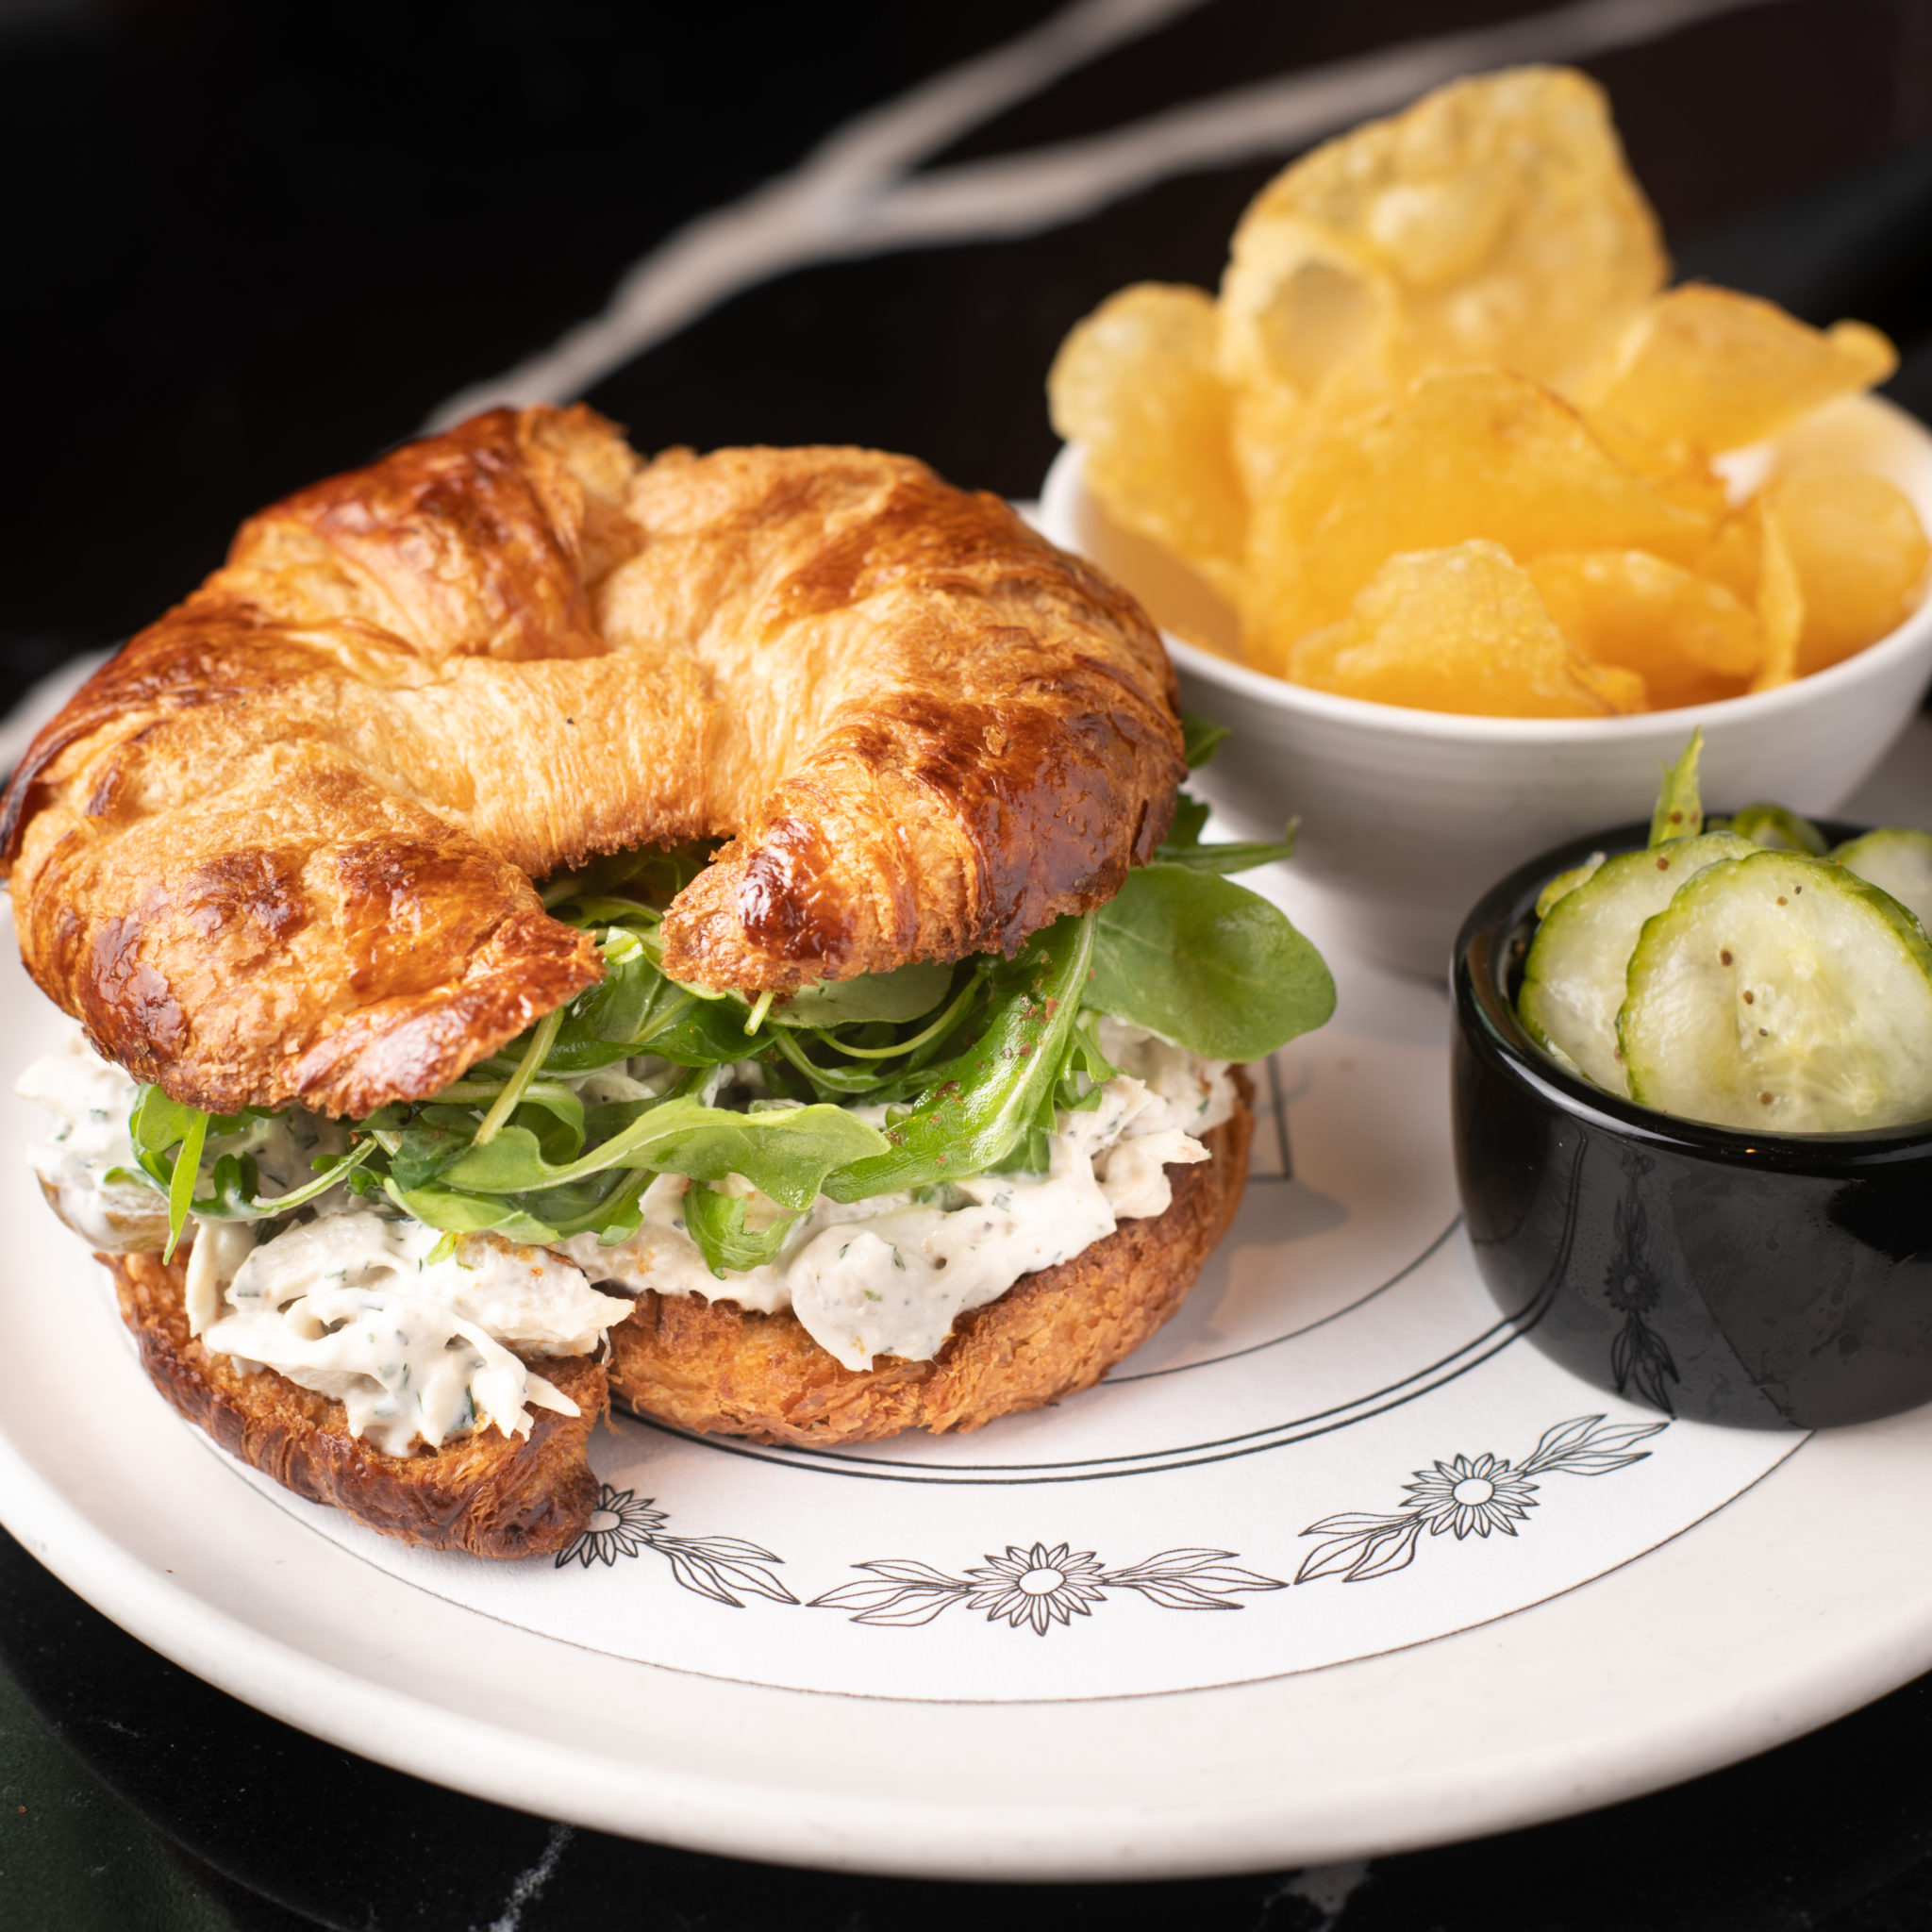 Winter Park Lunch Menu - The Glass Knife in Winter Park, FL - Chicken Salad on Croissant